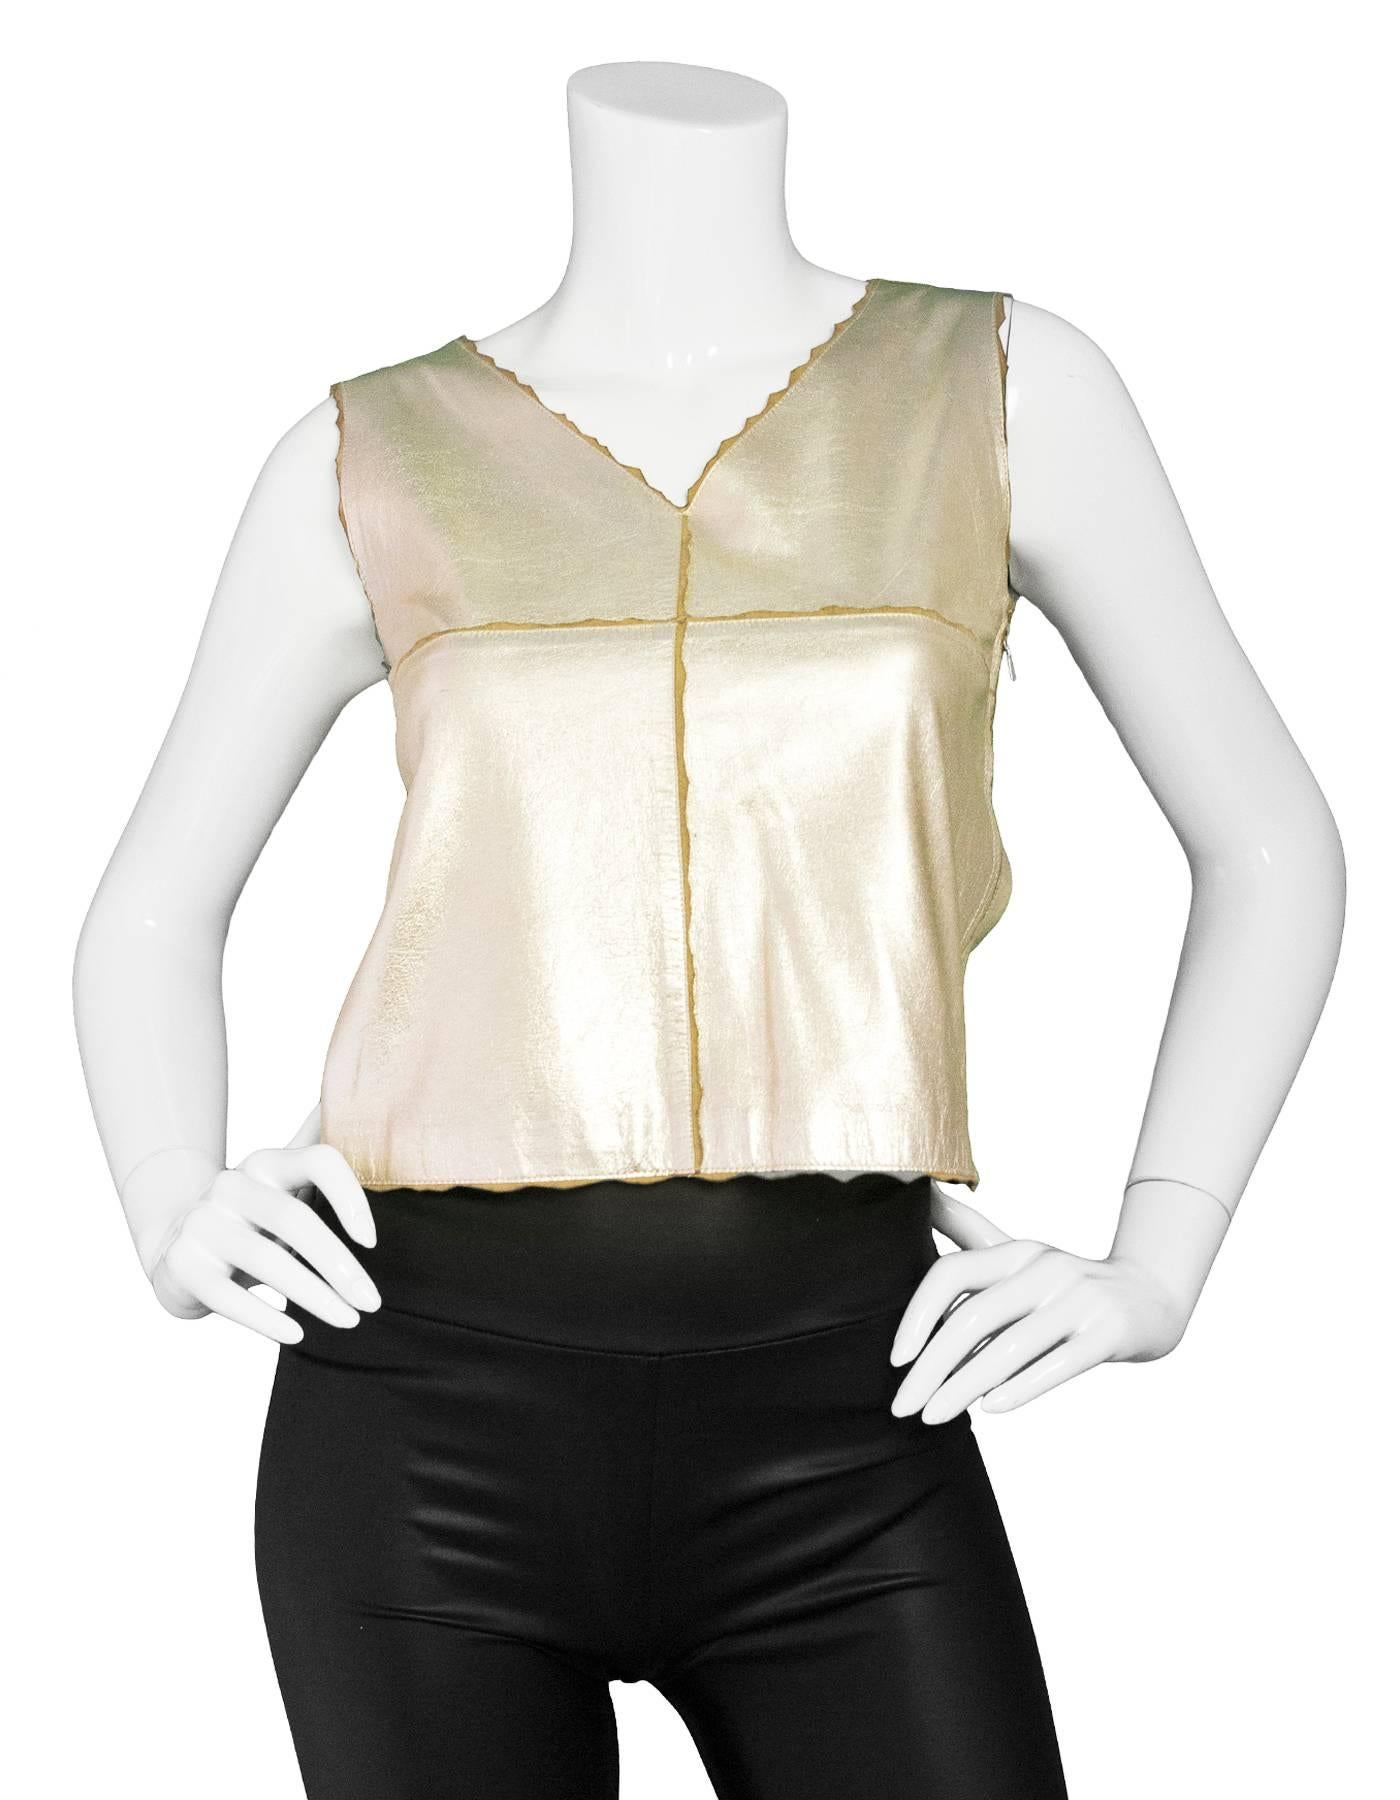 Chanel Metallic Gold Leather Shell Top
Fabric scalloped edges throughout exterior

Made In: France
Year of Production: 2000
Color: Metallic gold
Composition: 100% goatskin
Lining: Gold, 100% silk
Closure/Opening: Hidden side zip up
Exterior Pockets: